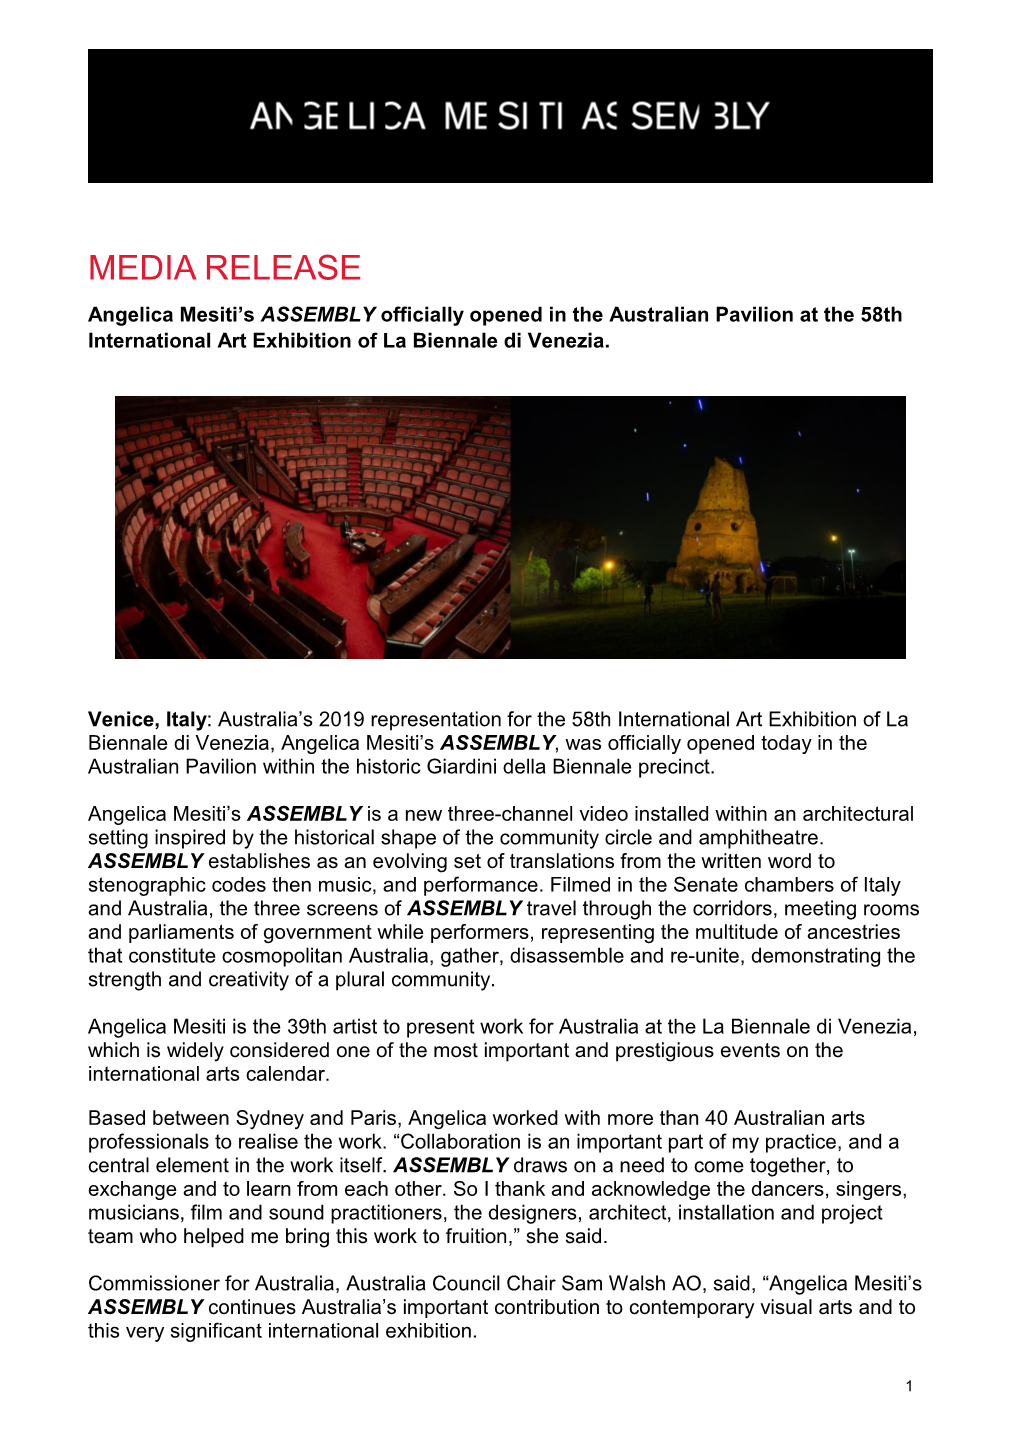 MEDIA RELEASE Angelica Mesiti’S ASSEMBLY Officially Opened in the Australian Pavilion at the 58Th International Art Exhibition of La Biennale Di Venezia